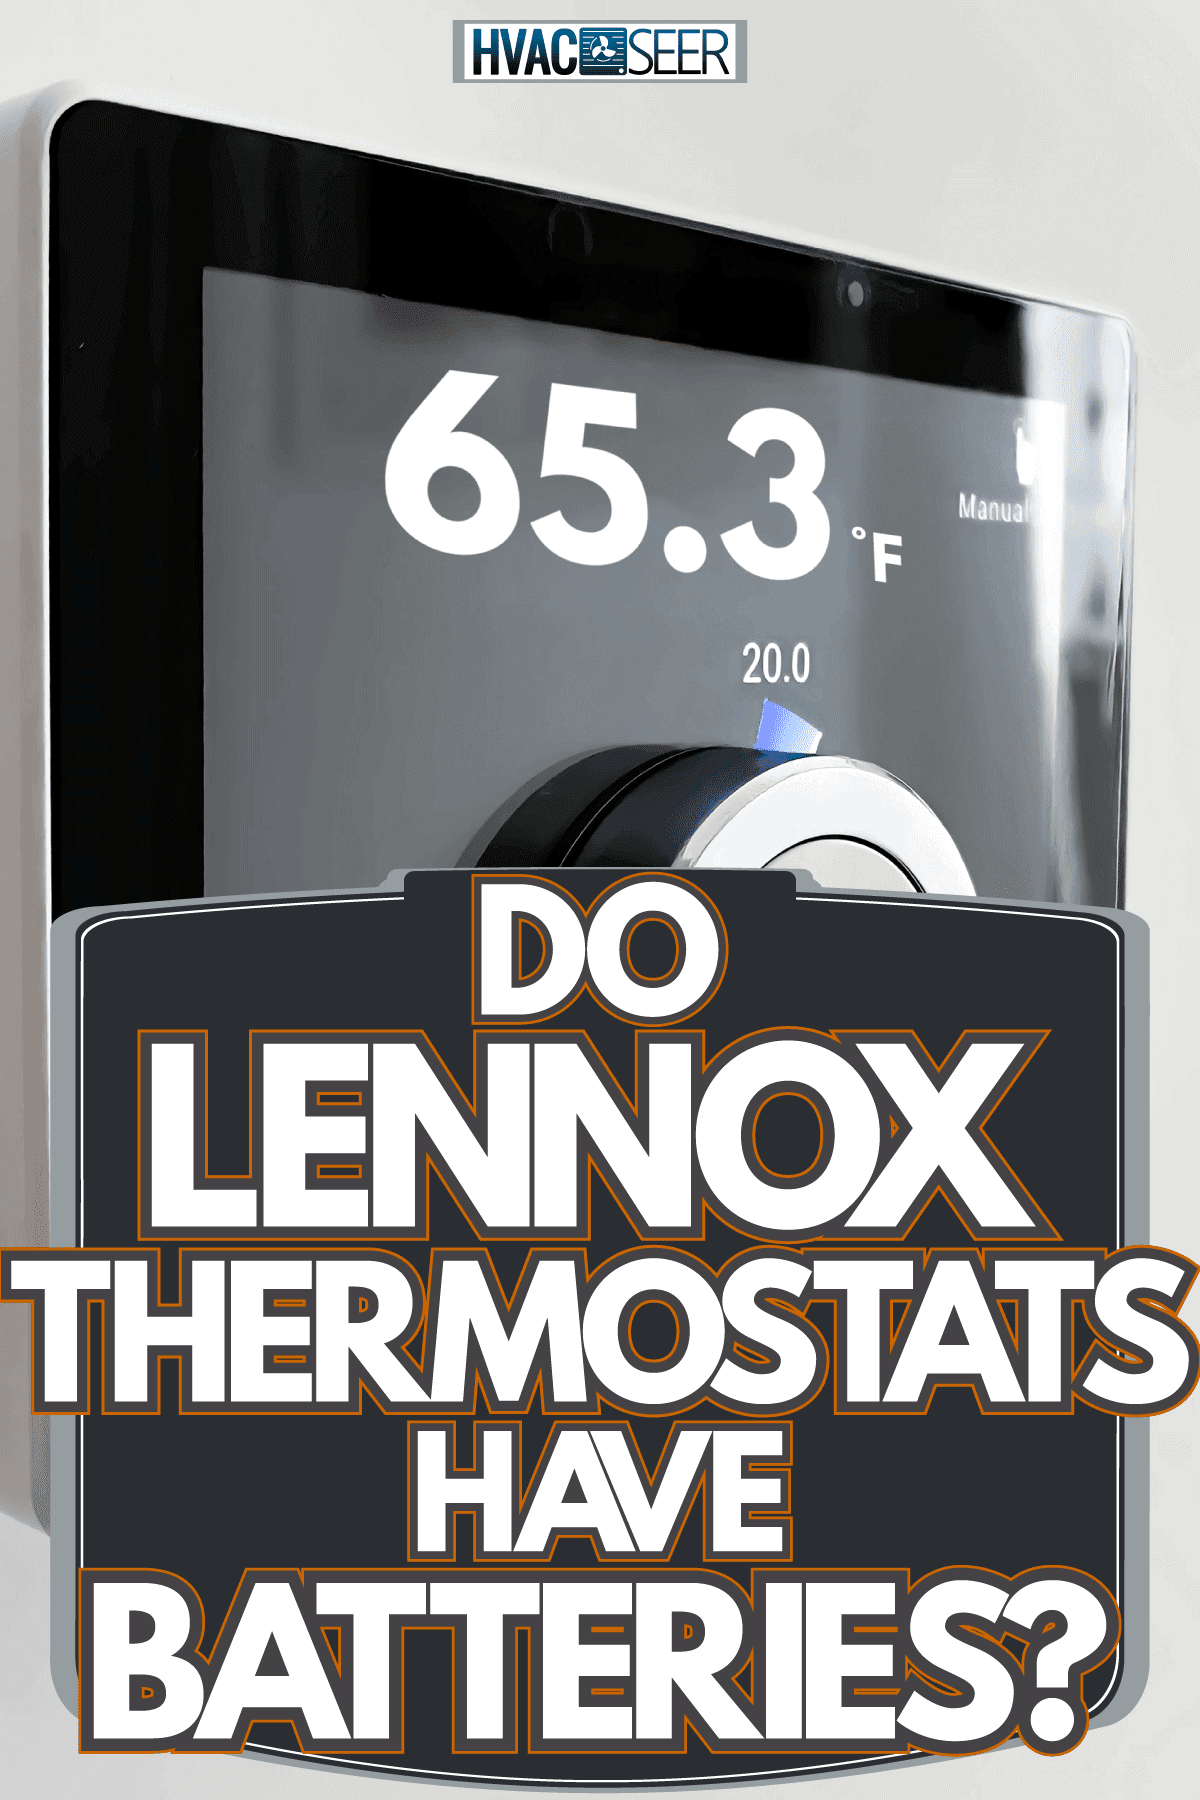 A thermostat set to 65.3 degrees Fahrenheit, Do Lennox Thermostats Have Batteries? 